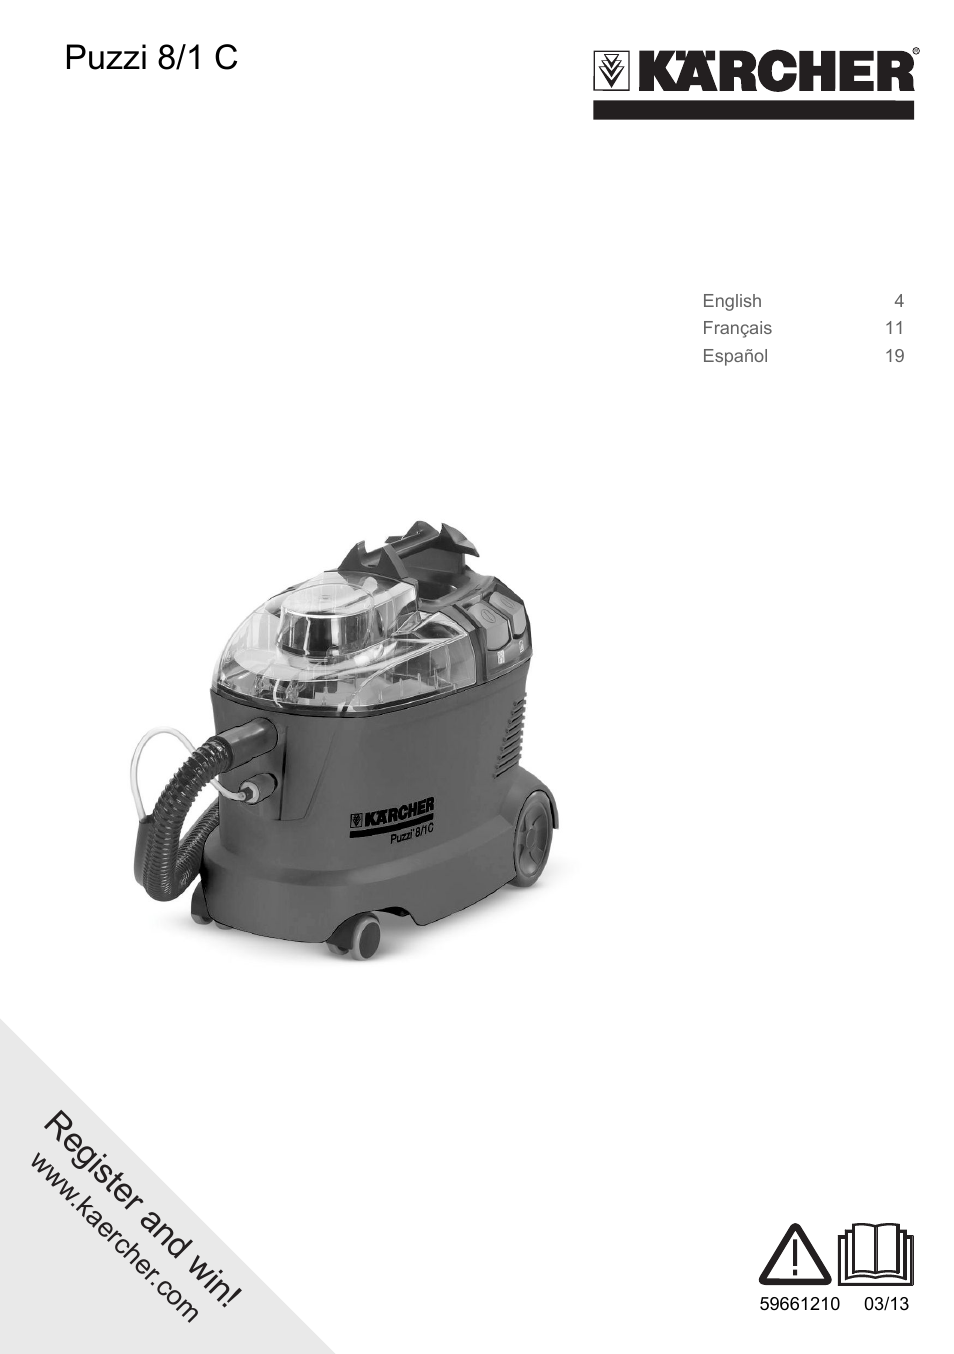 Karcher PUZZI 8-1 C User Manual | 32 pages